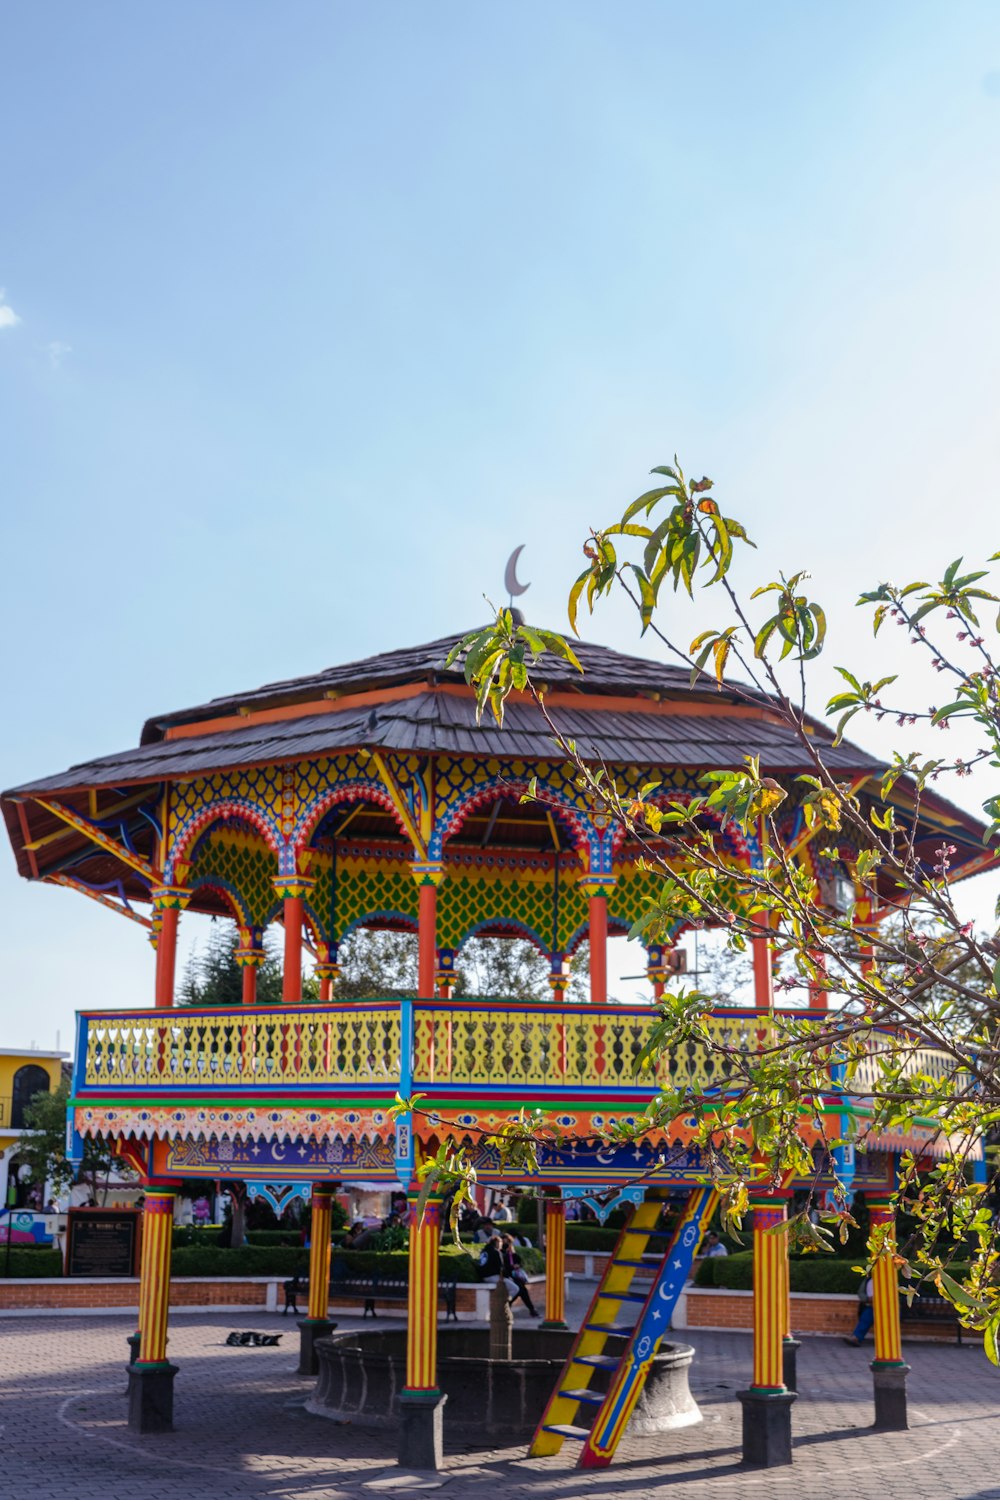 a colorful gazebo sits in the middle of a park